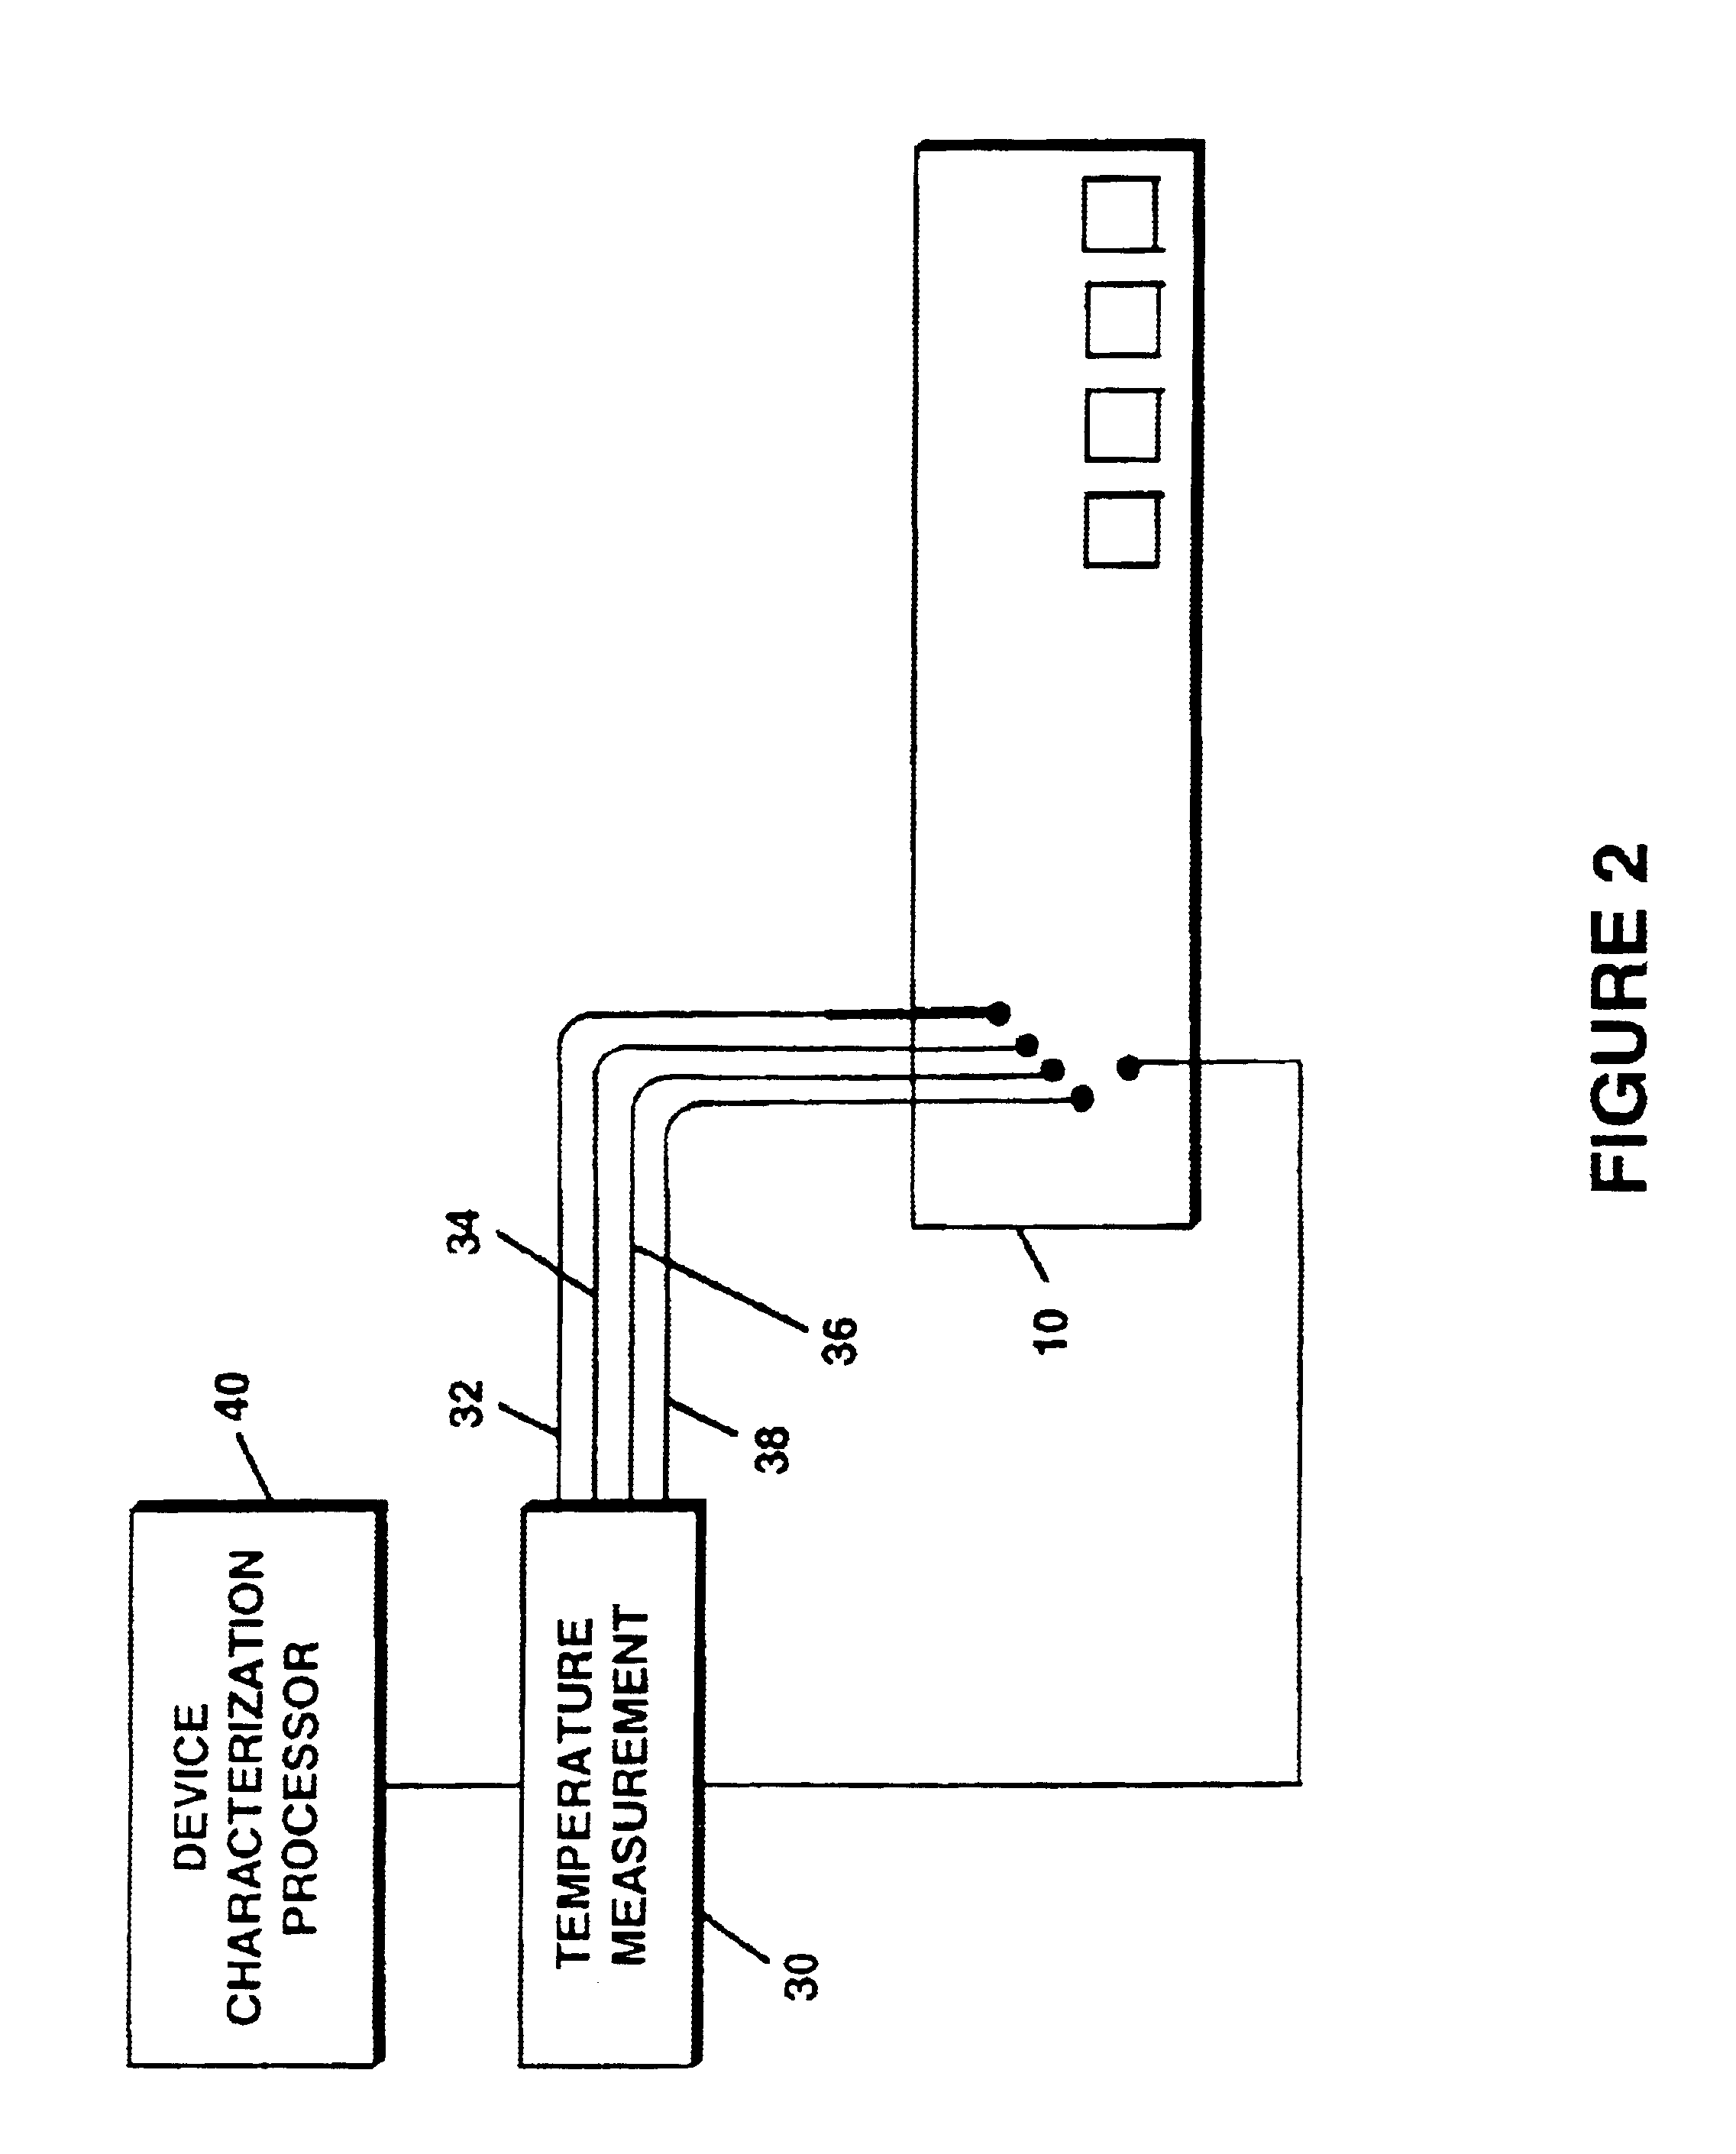 Method and apparatus for characterization of devices and circuits